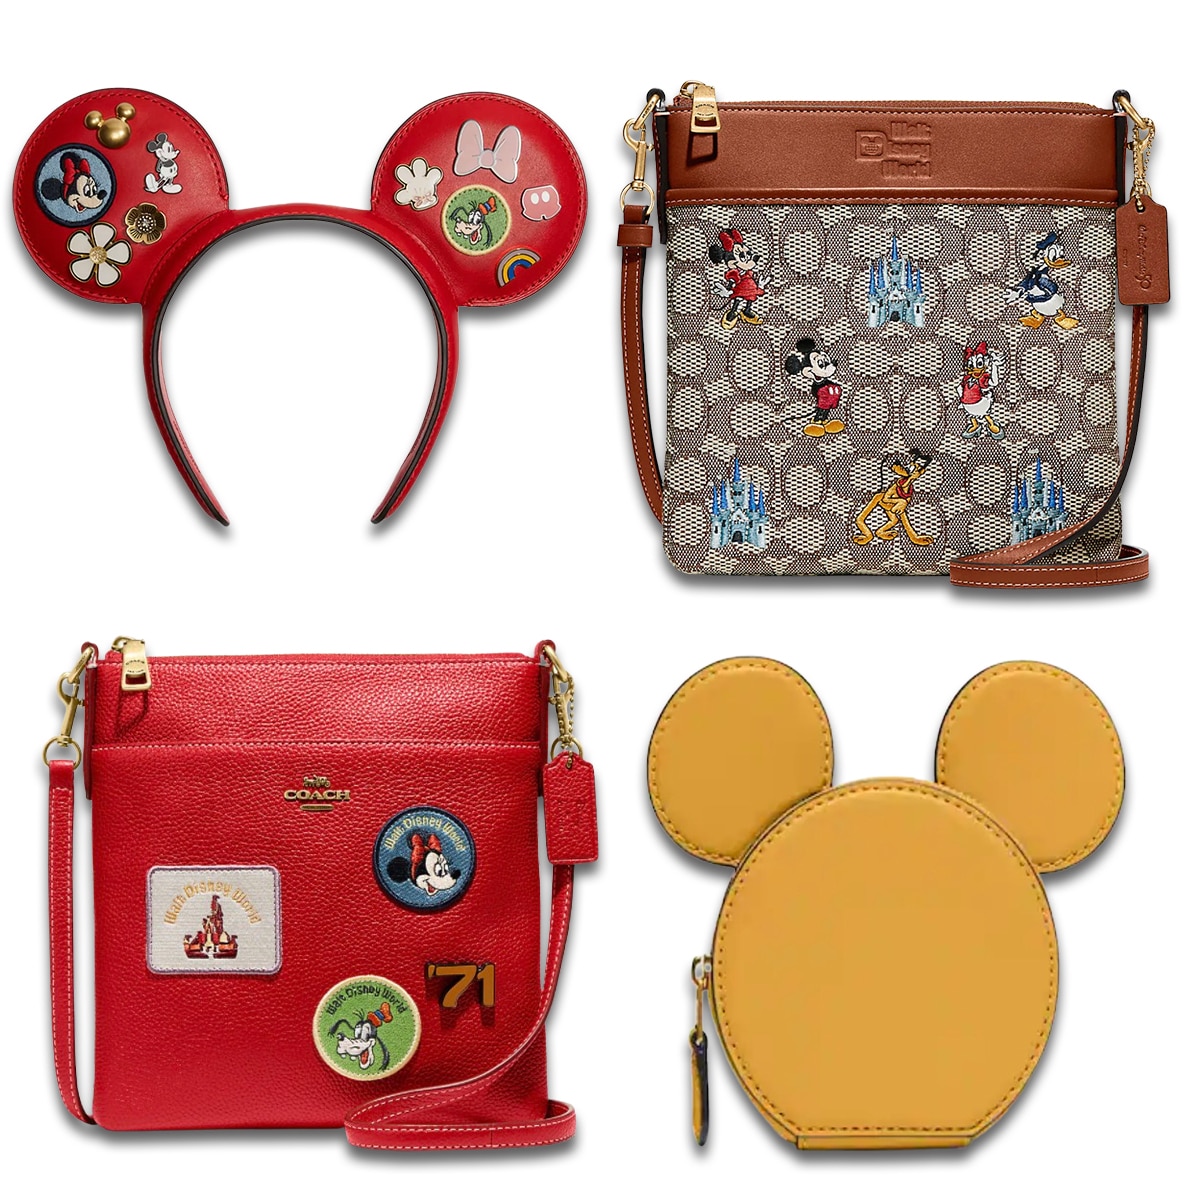 Disney x Coach's New Collection Just Dropped & It's Selling Out 